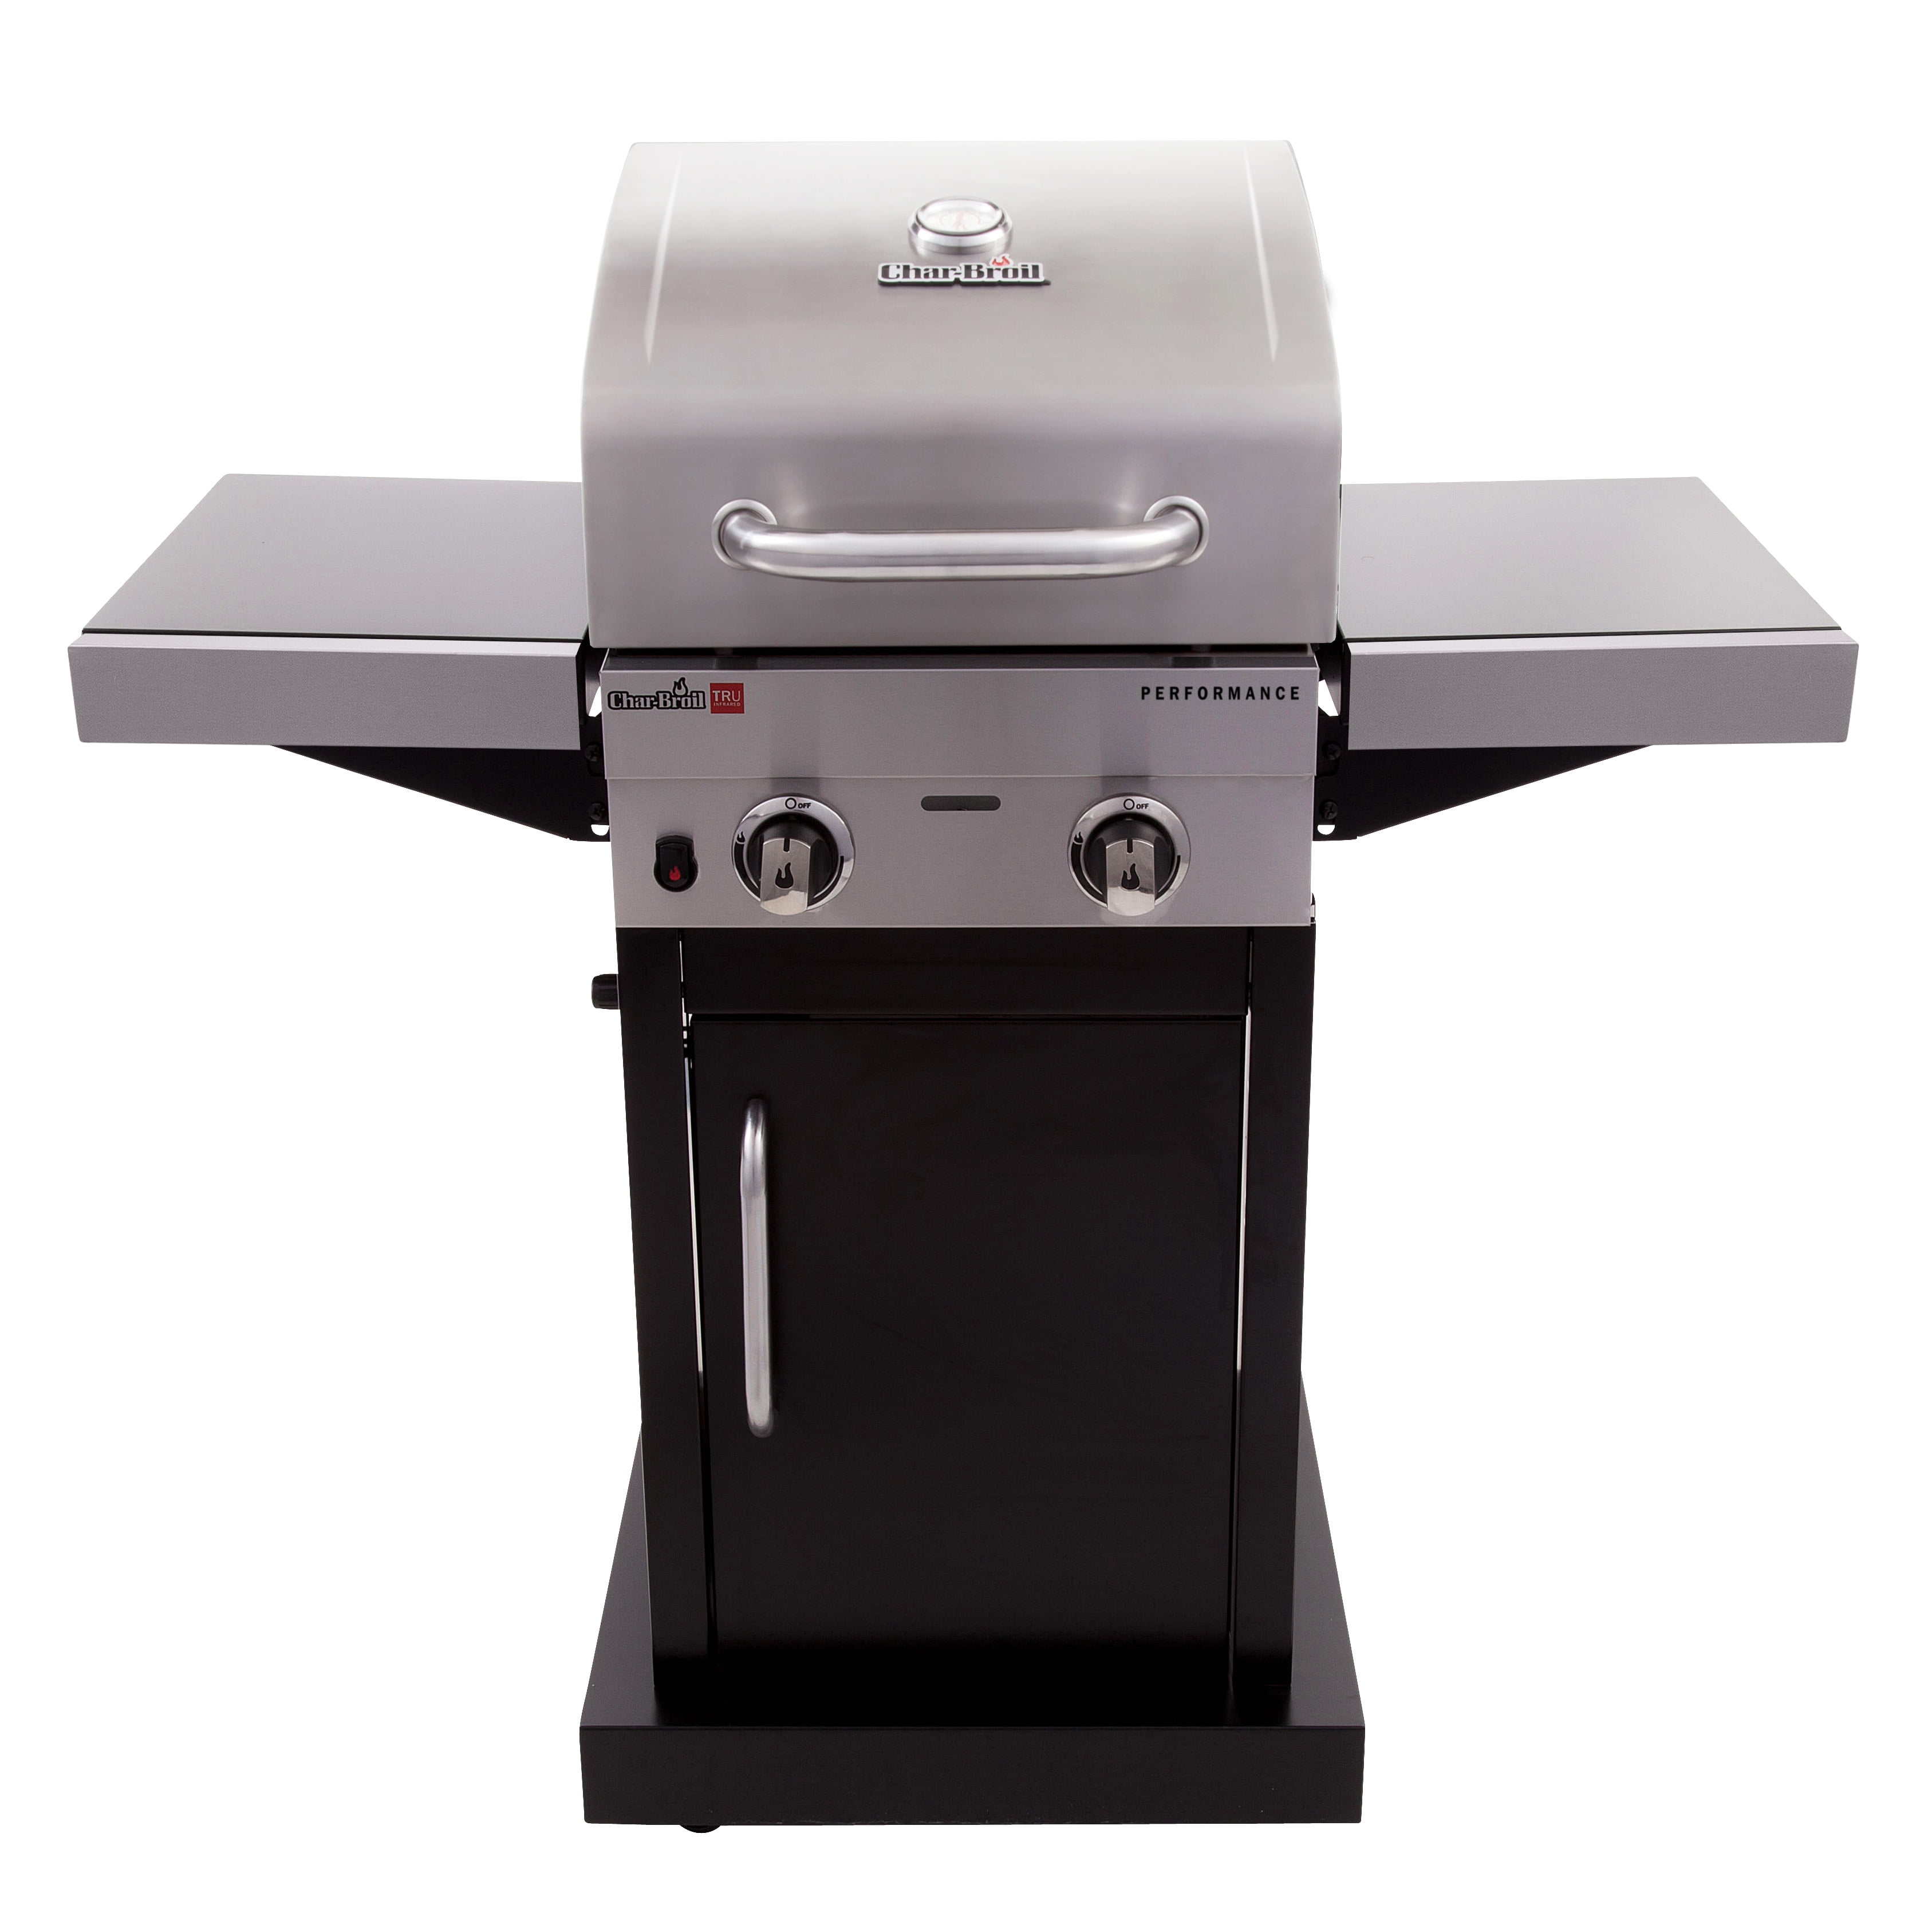 Char-Broil Performance TRU-Infrared 2-Burner Gas Grill, Stainless Steel Two Burner Stainless Steel Gas Grills